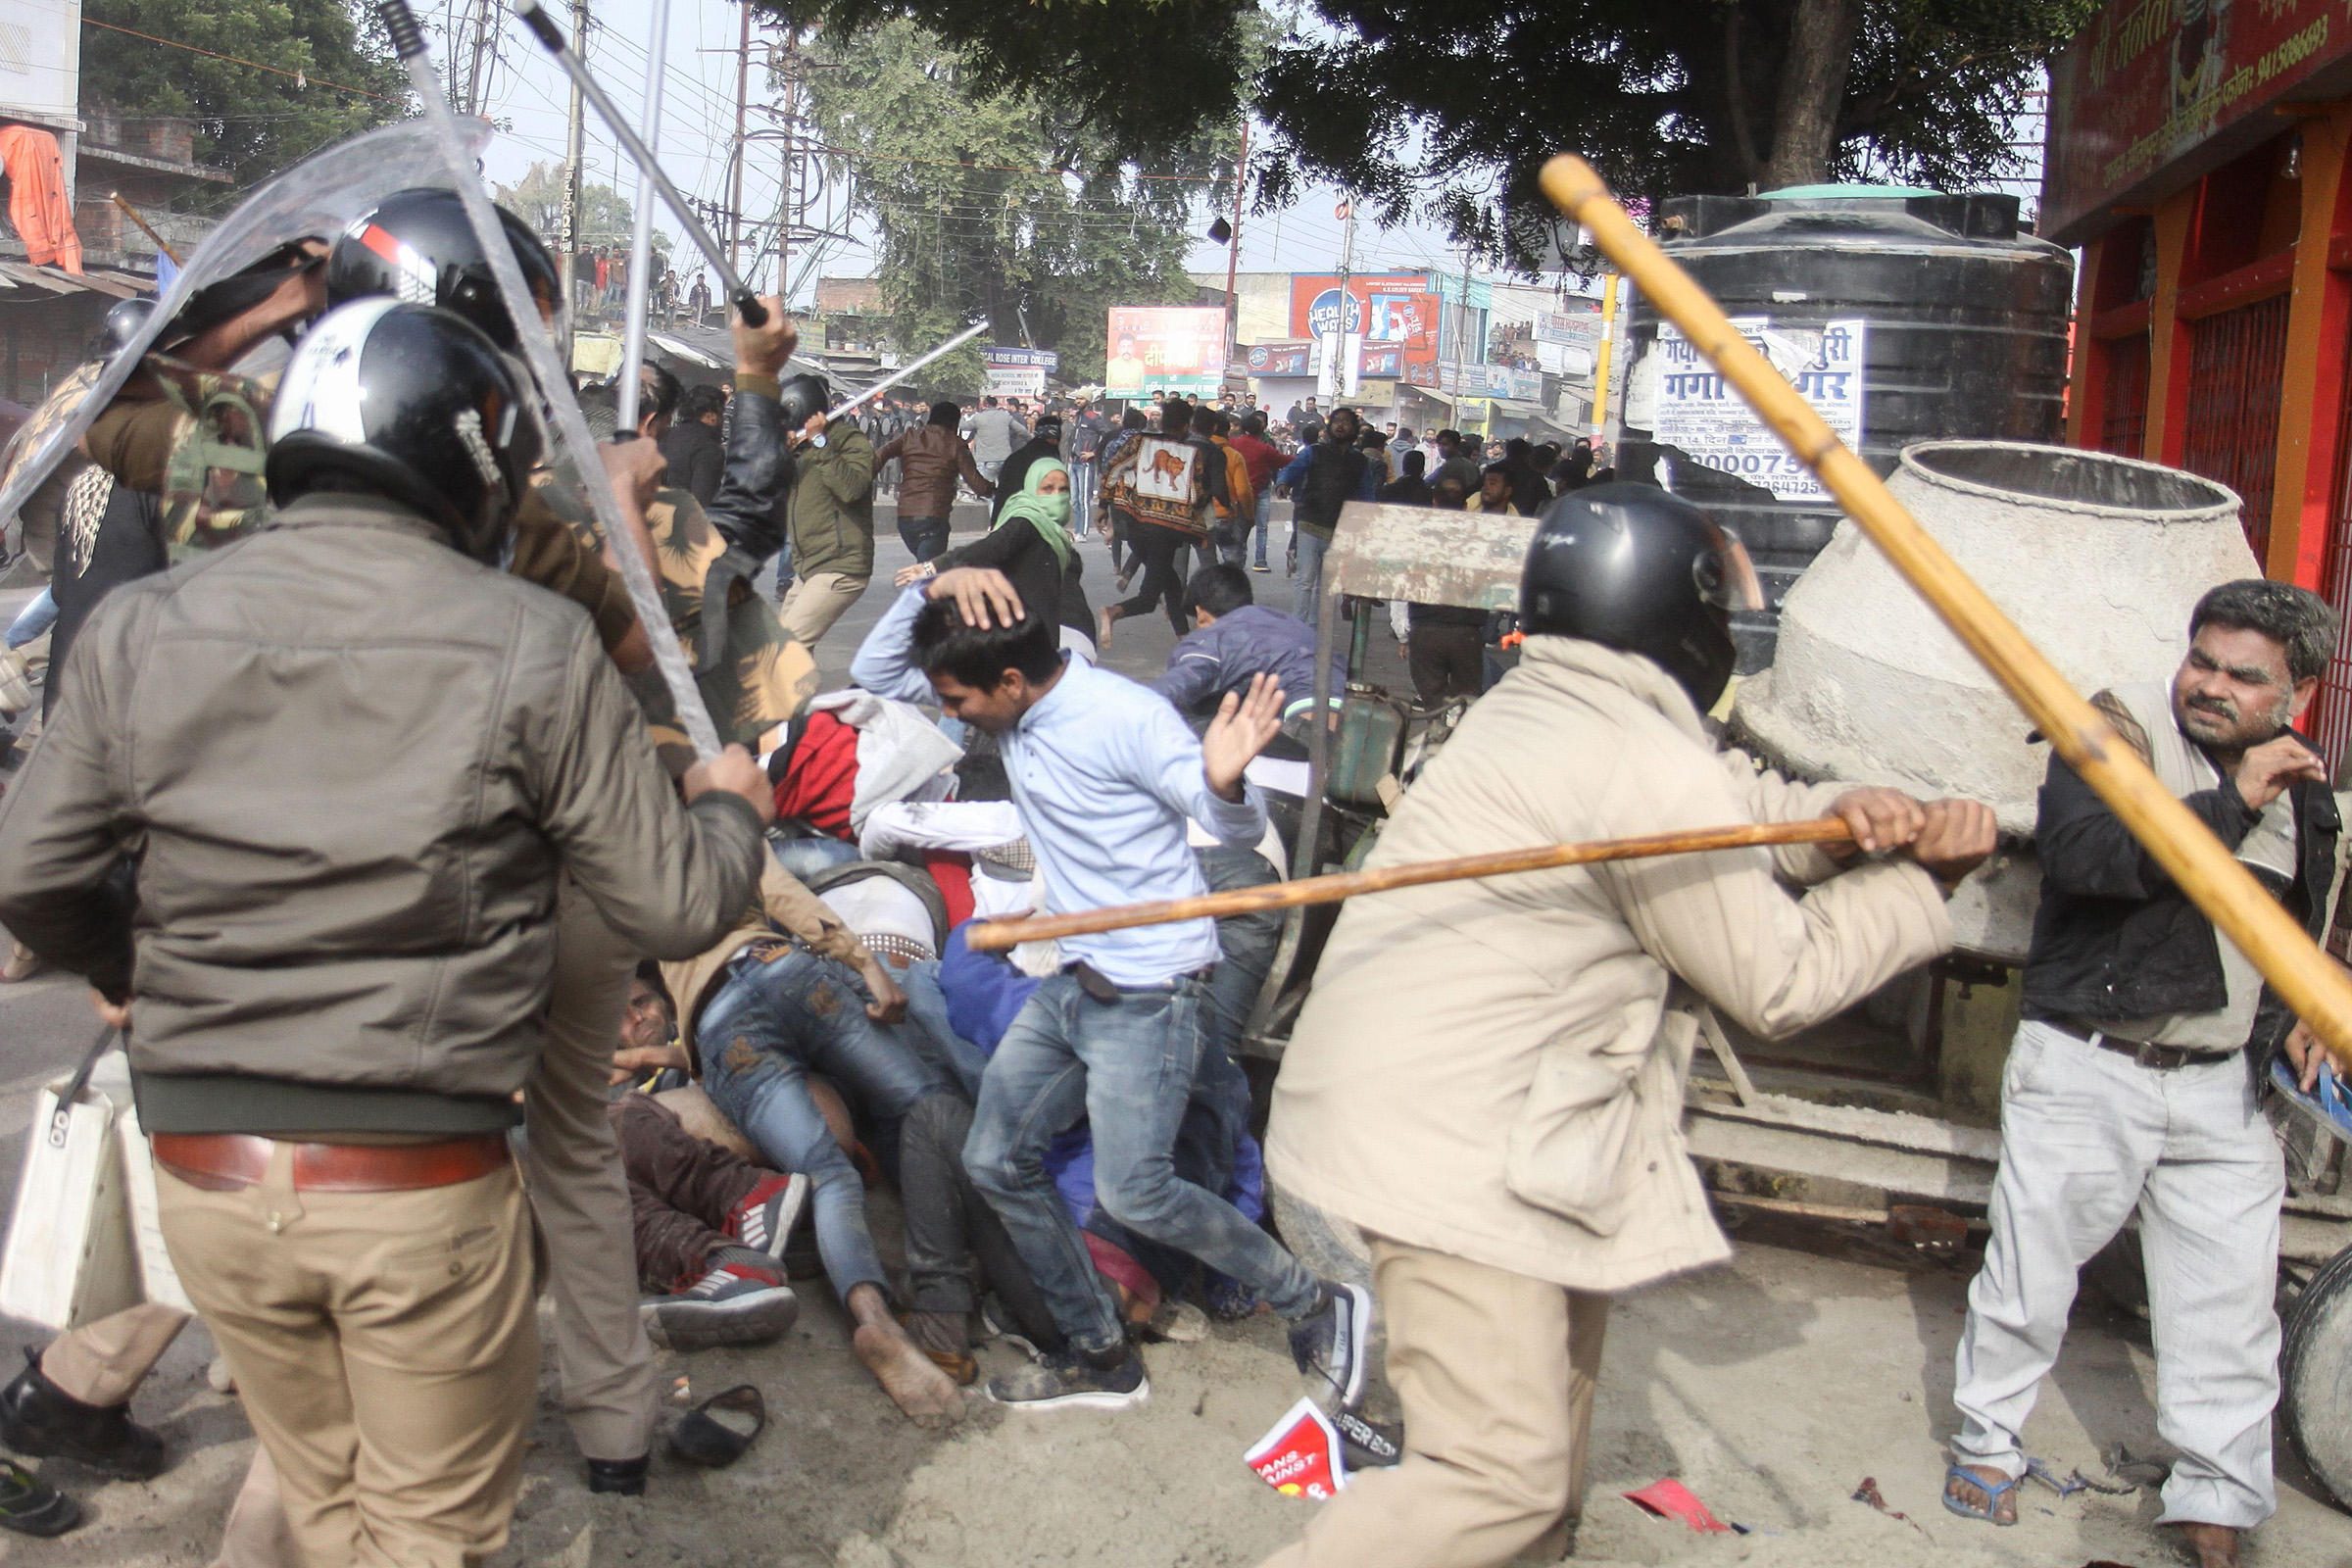 Police beat protesters with sticks during a demonstration against India's new citizenship law in Lucknow, Uttar Pradesh, India on Dec. 19, 2019.  (STR/AFP via Getty Images)